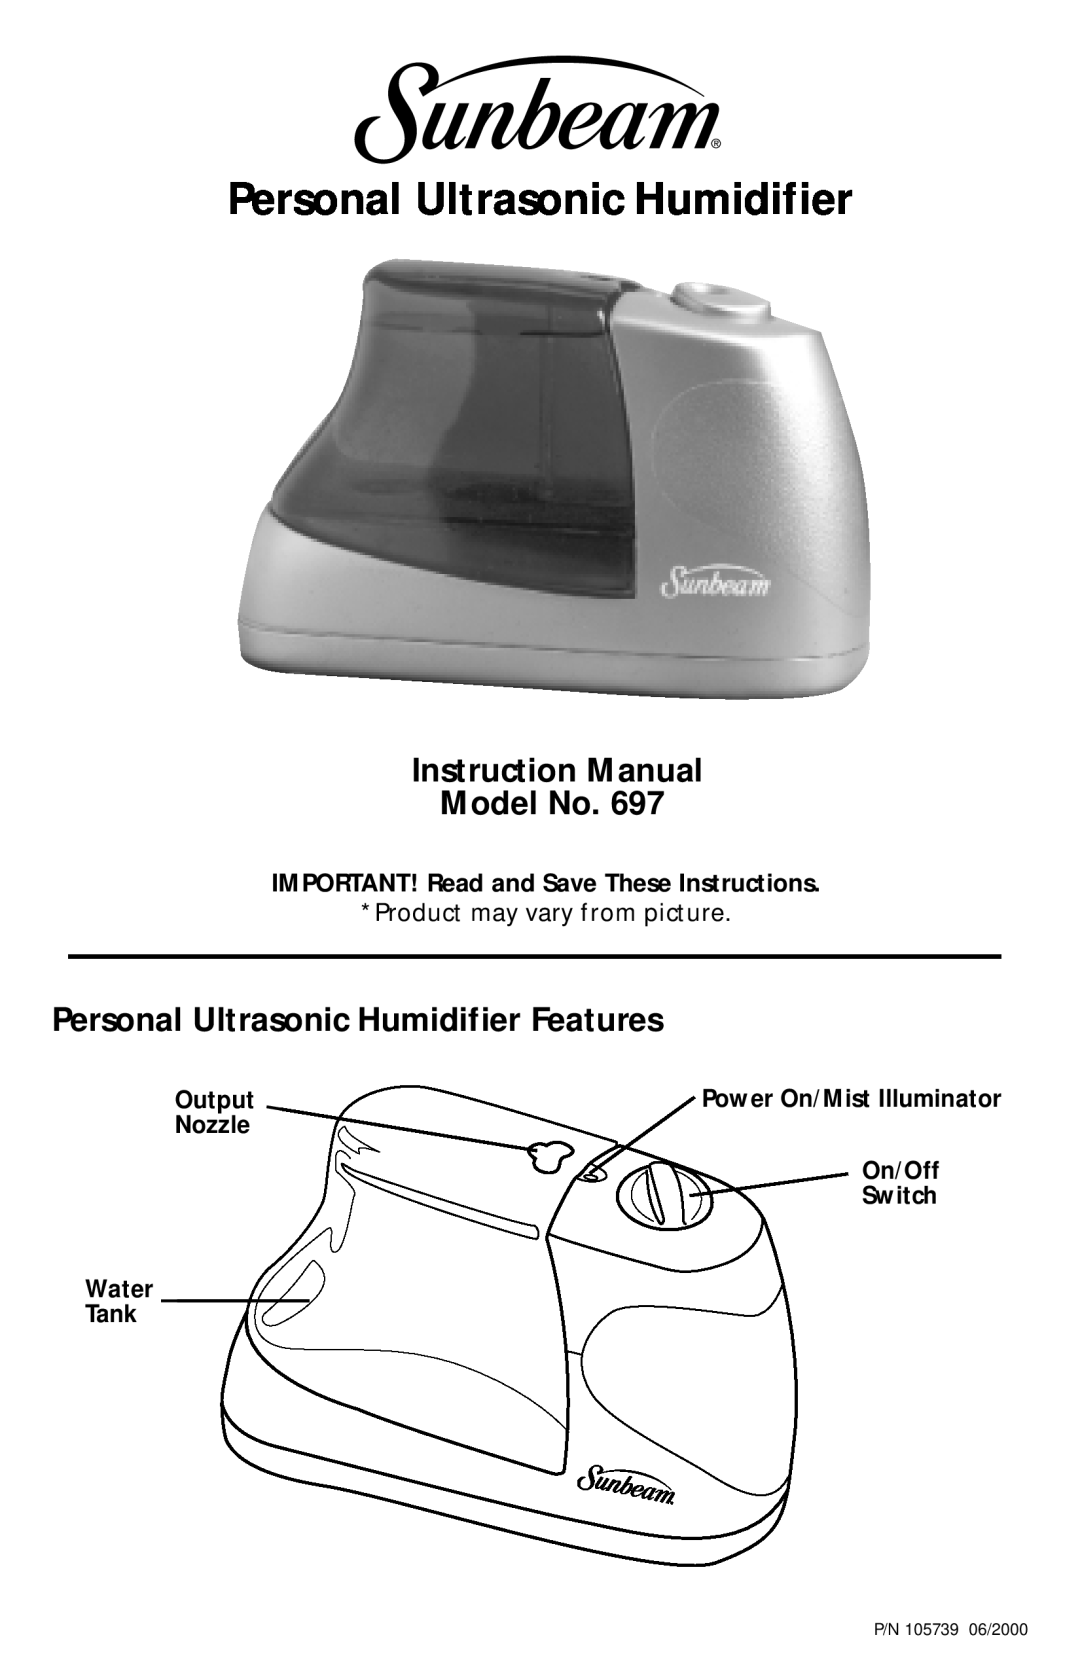 Sunbeam 697 instruction manual Personal Ultrasonic Humidifier Features, IMPORTANT! Read and Save These Instructions, Water 